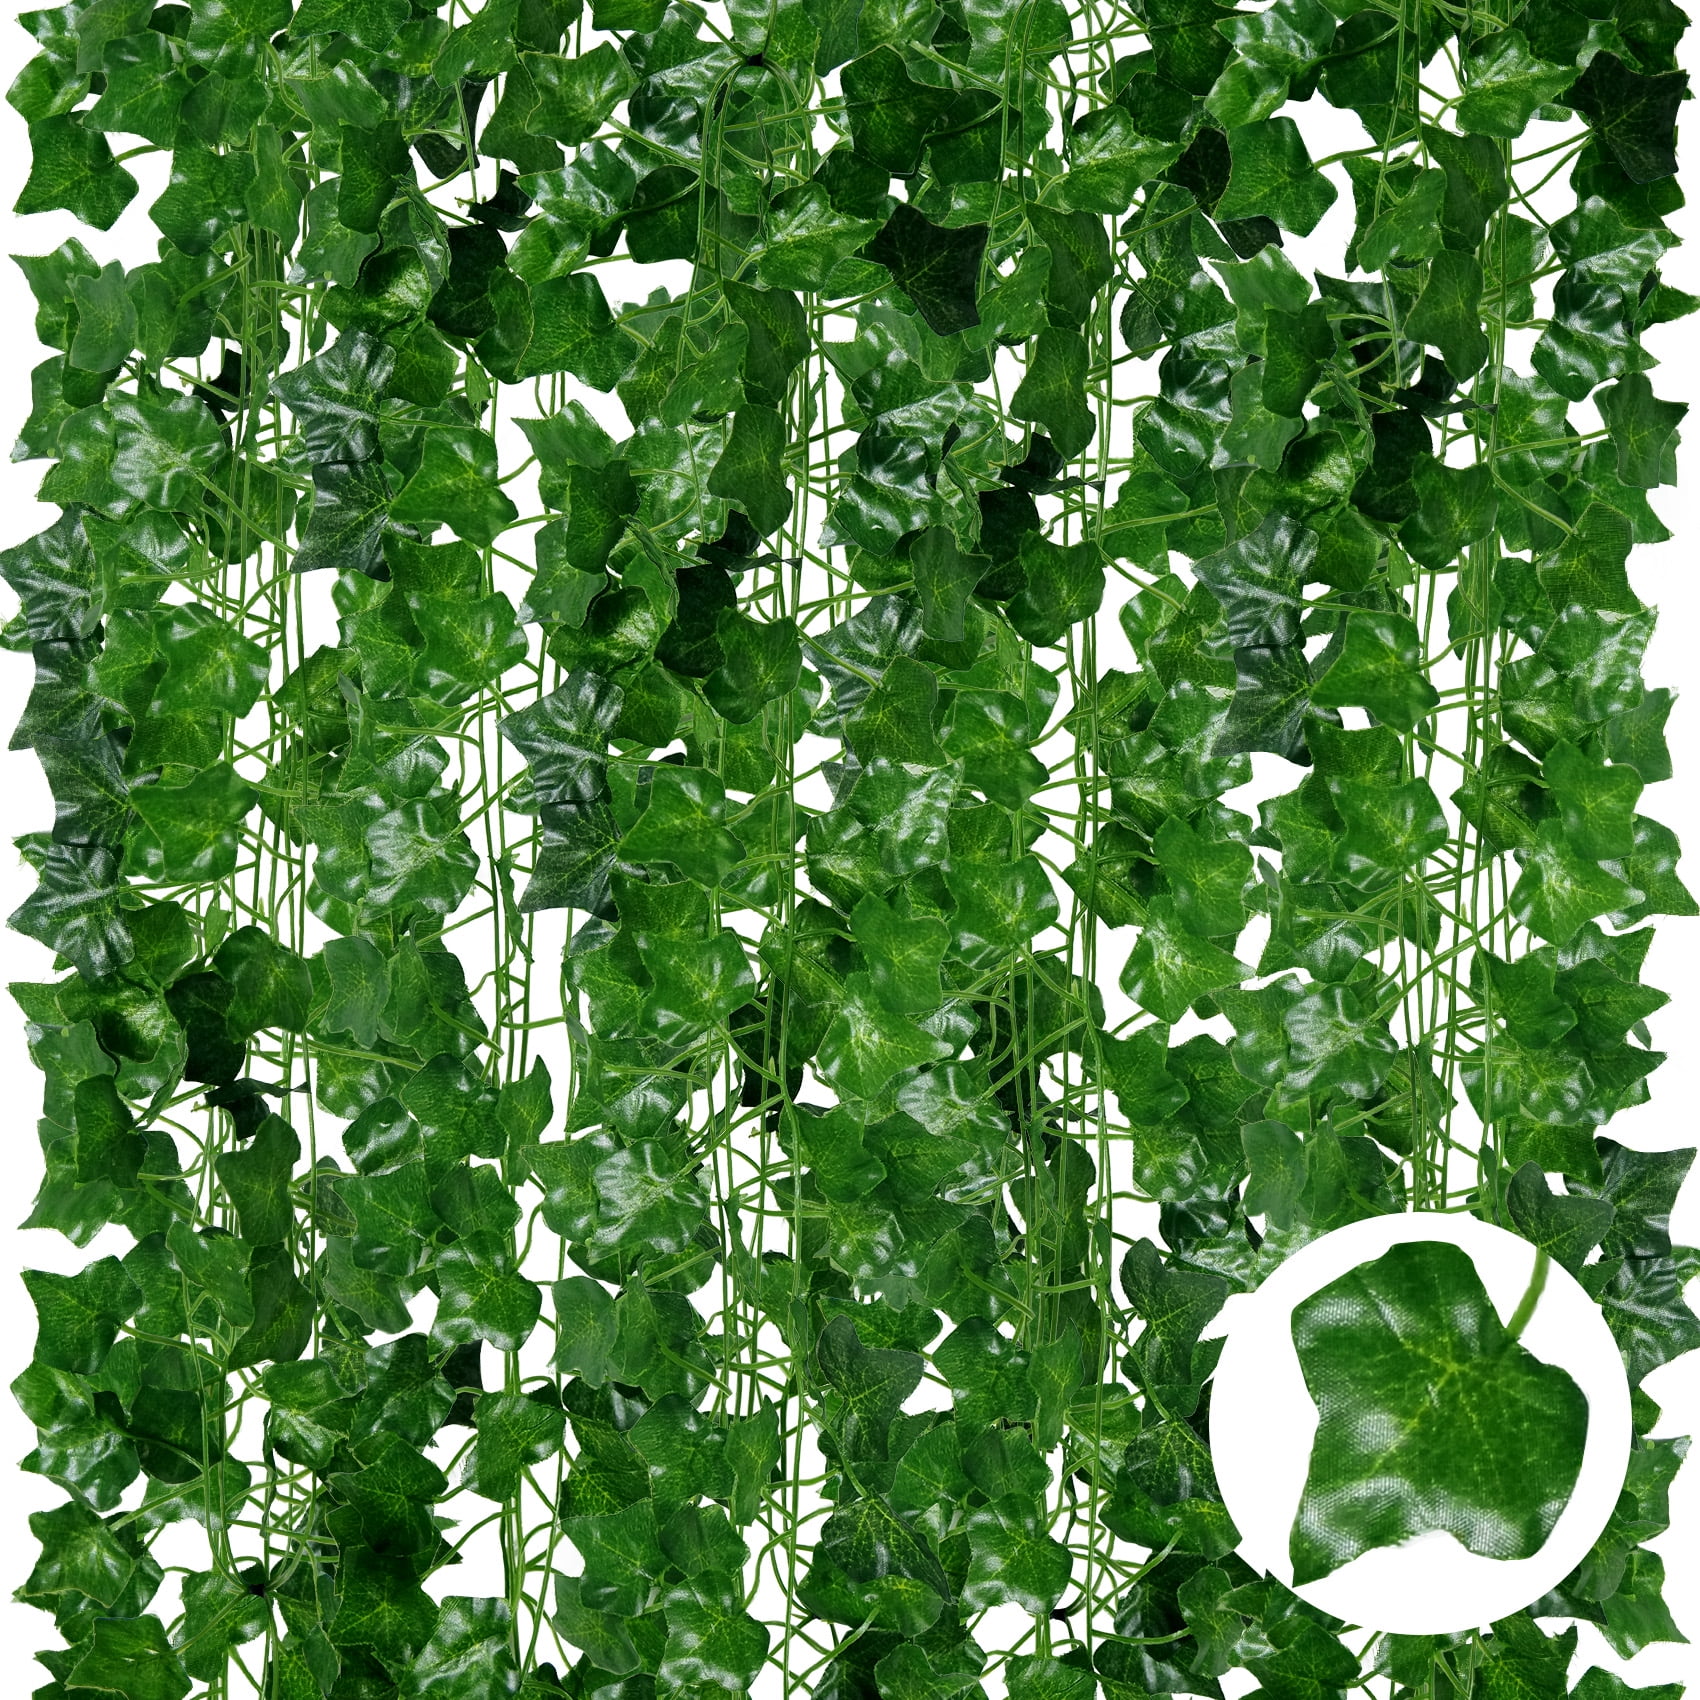 YOLETO 24 Pack Artificial Ivy Garland, 165Ft Fake Ivy Vines for Home Decor,  Faux Hanging Plants for Indoor Outdoor Greenery Aesthetics Decoration 